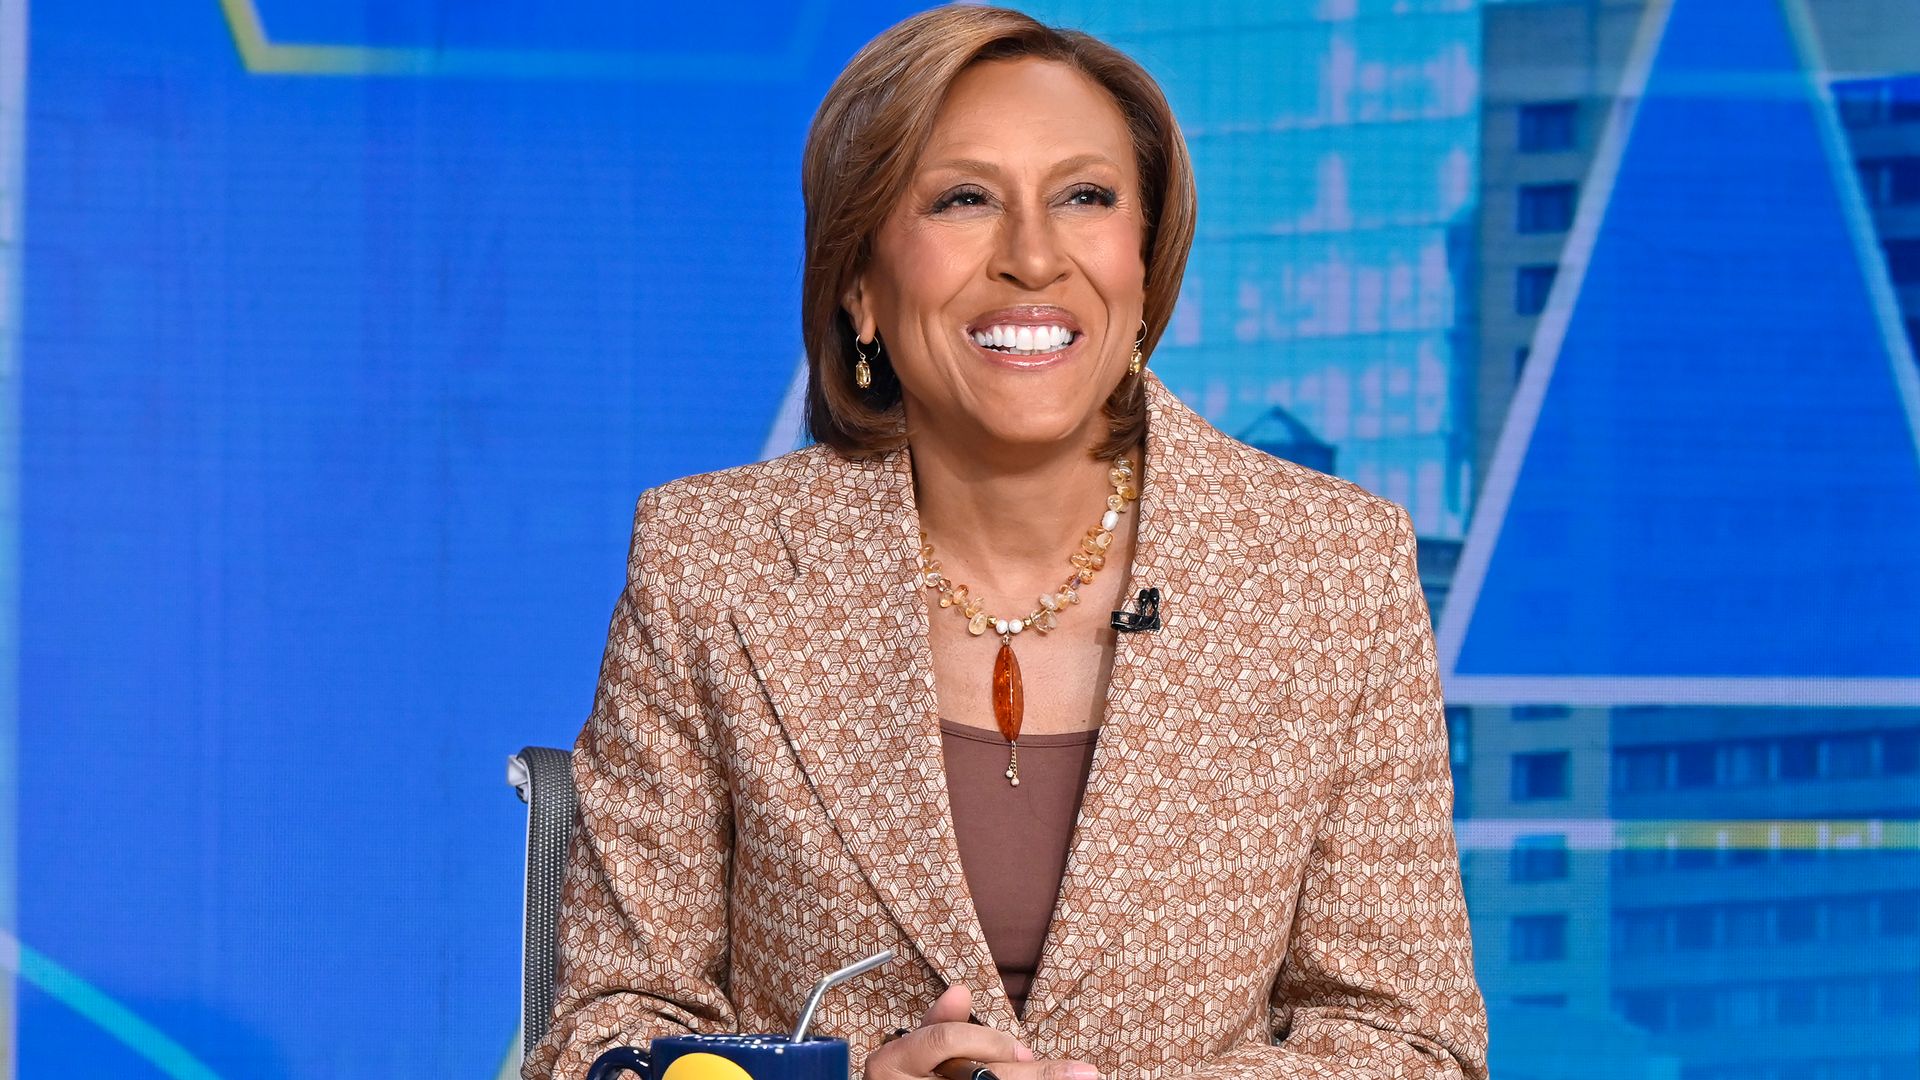 Robin Roberts is getting married herself in the next few weeks